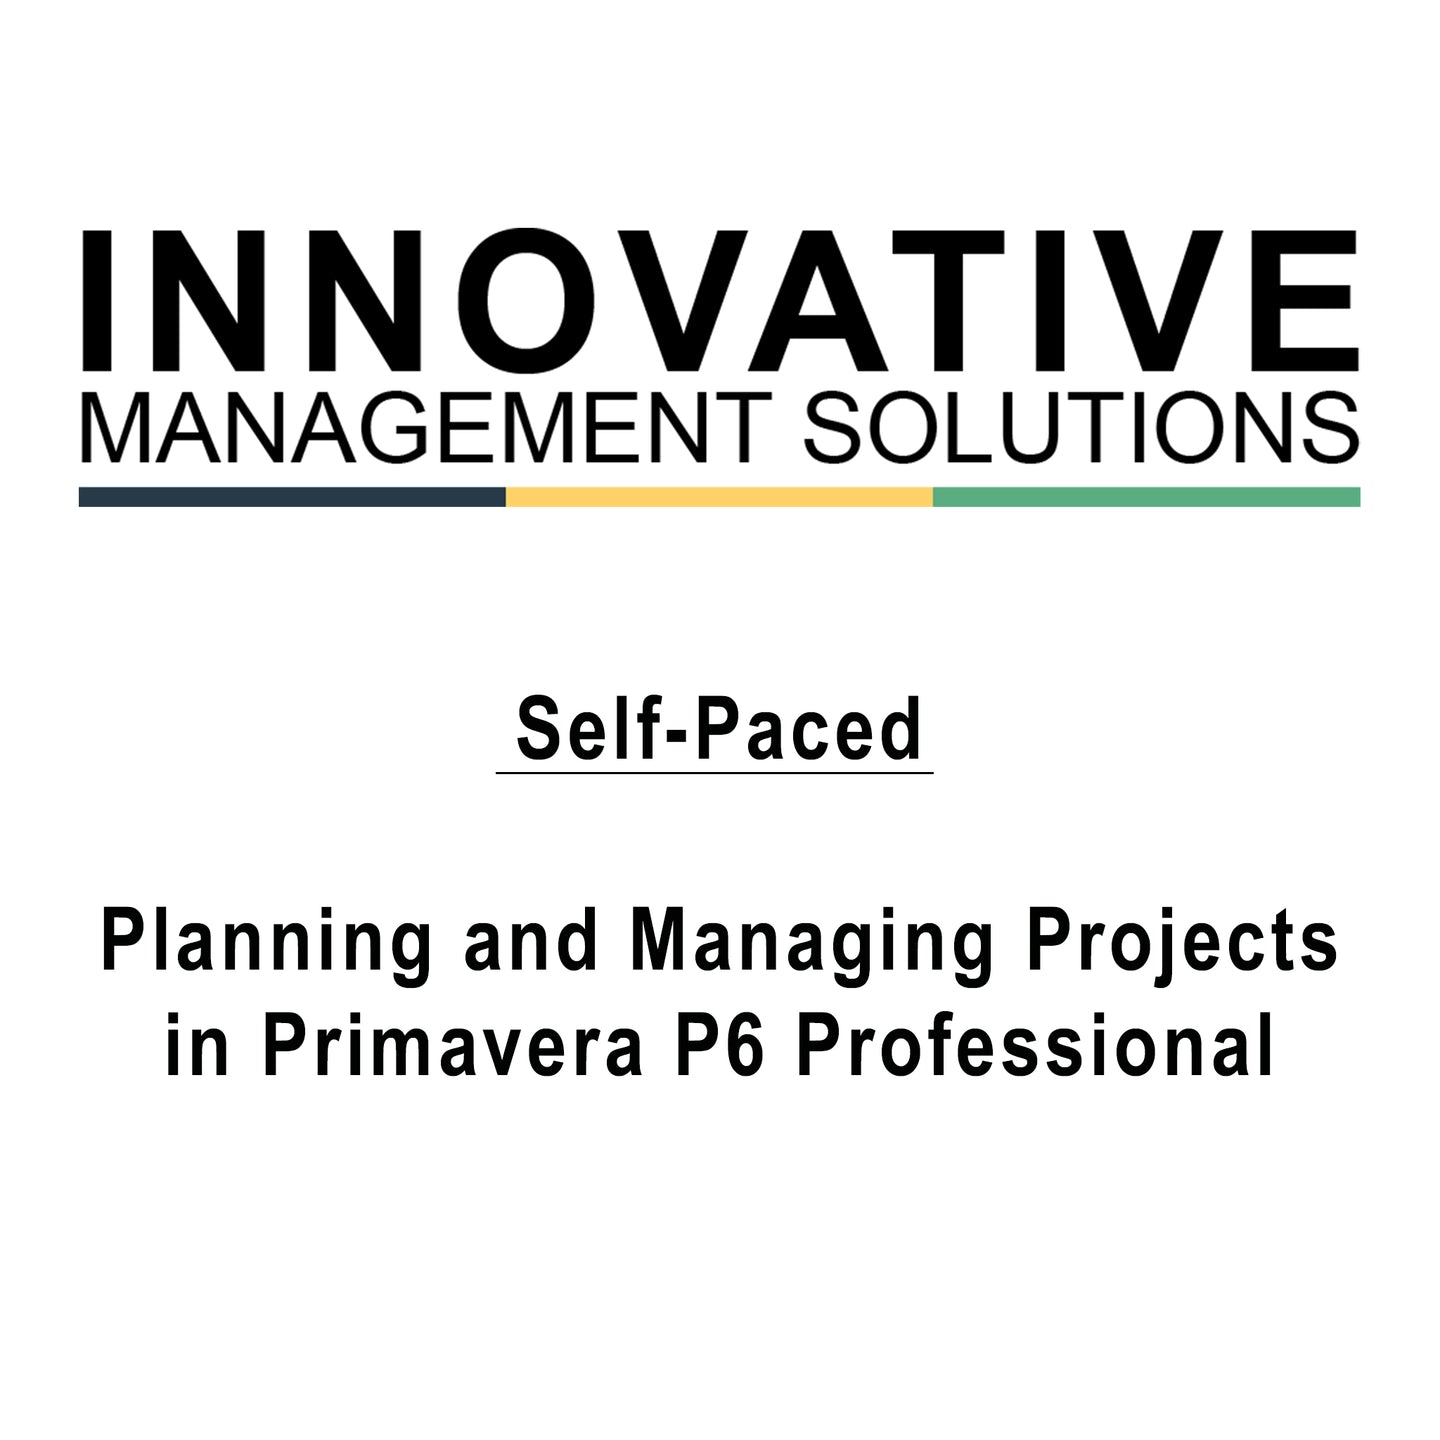 Self-Paced - Planning and Managing Projects in Primavera P6 Professional